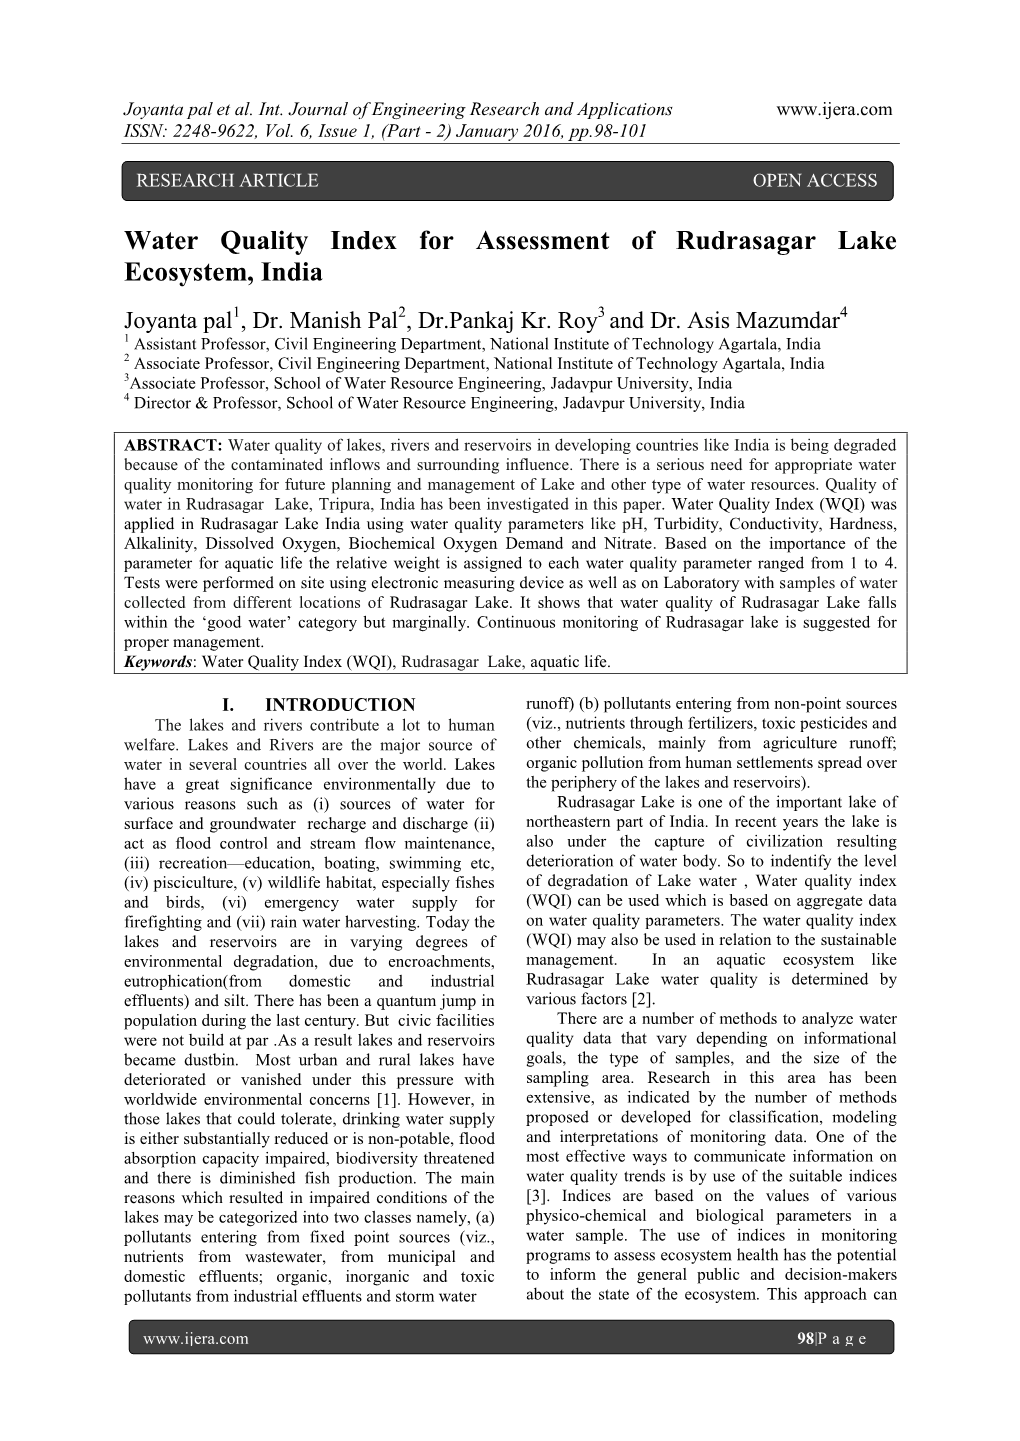 Water Quality Index for Assessment of Rudrasagar Lake Ecosystem, India